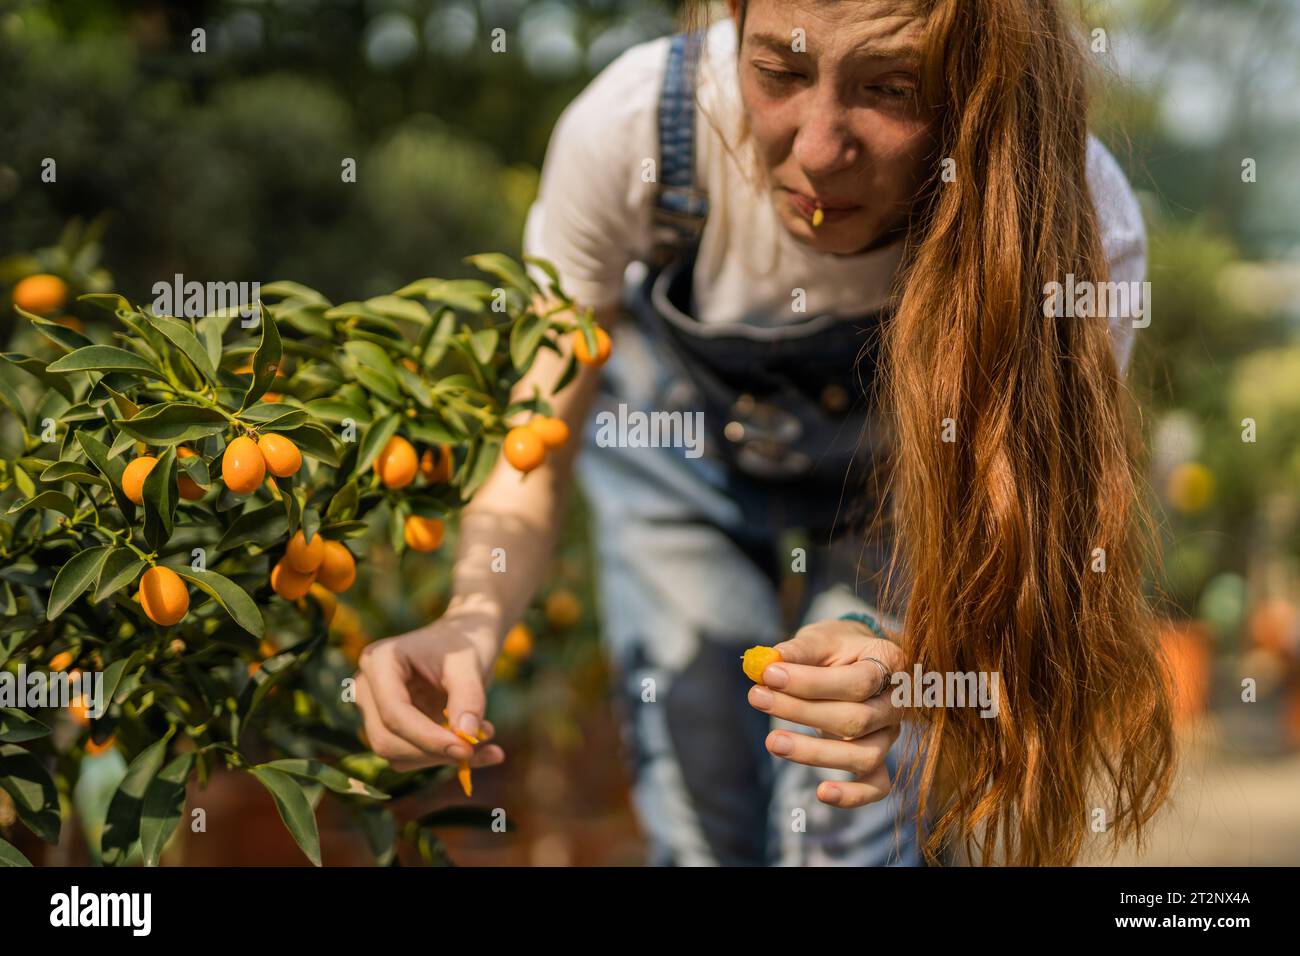 Ginger girl reacting after she tasted unripe tangerine that she picked from the tree Stock Photo